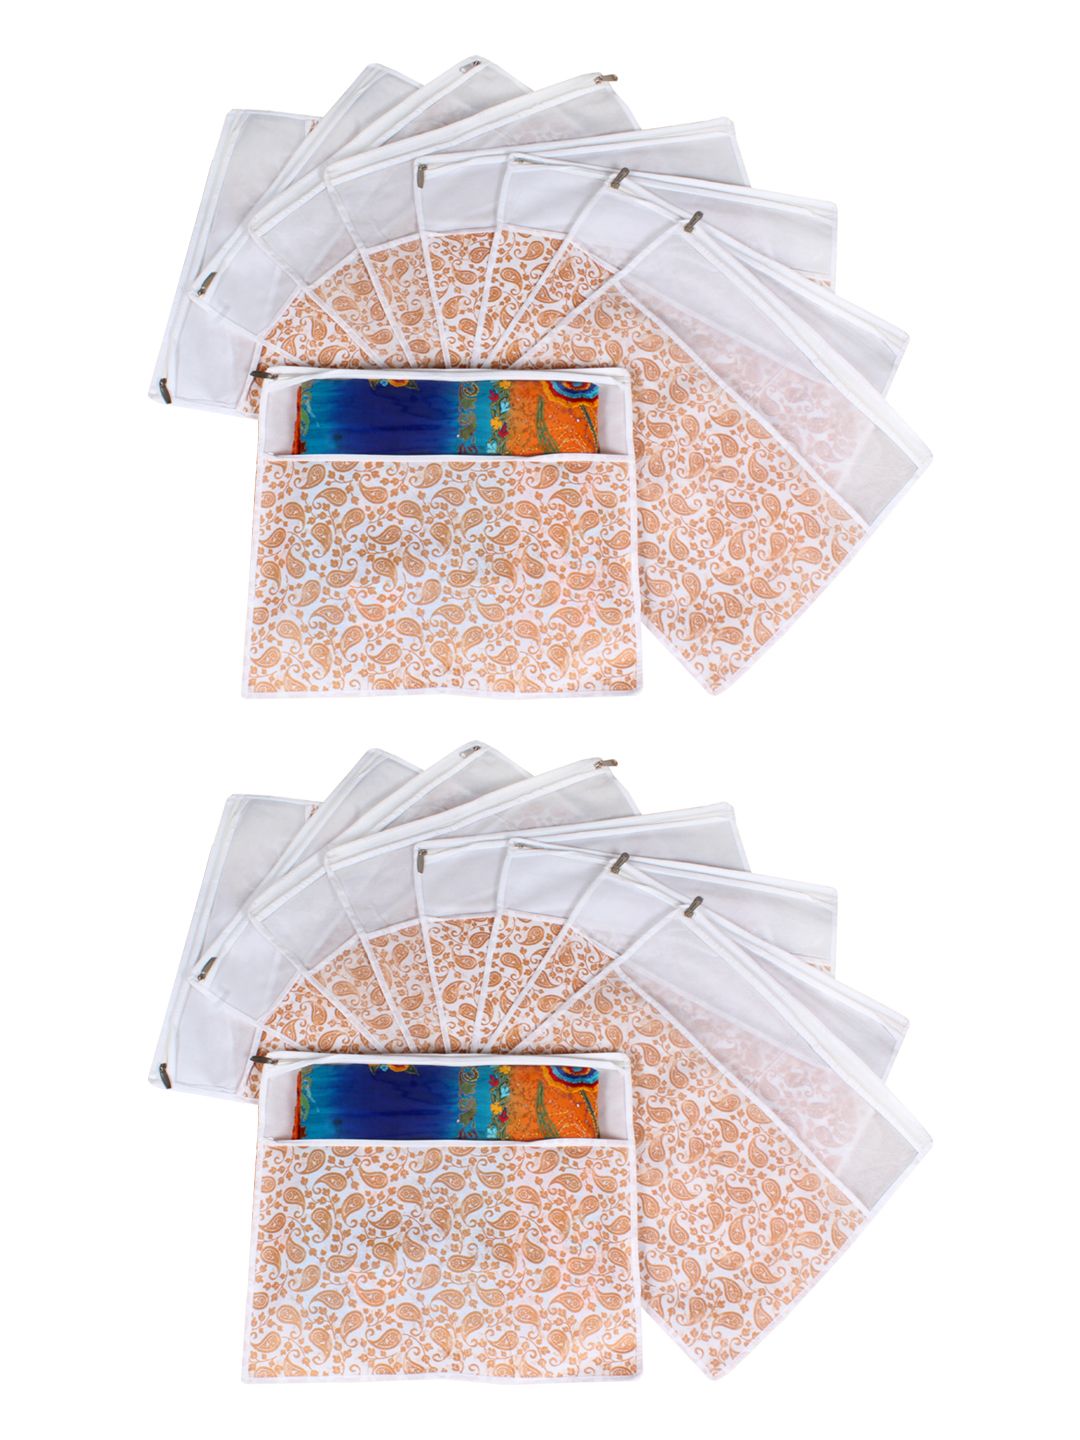 prettykrafts Brown & White Set of 18 Printed Saree Cover Organisers Price in India